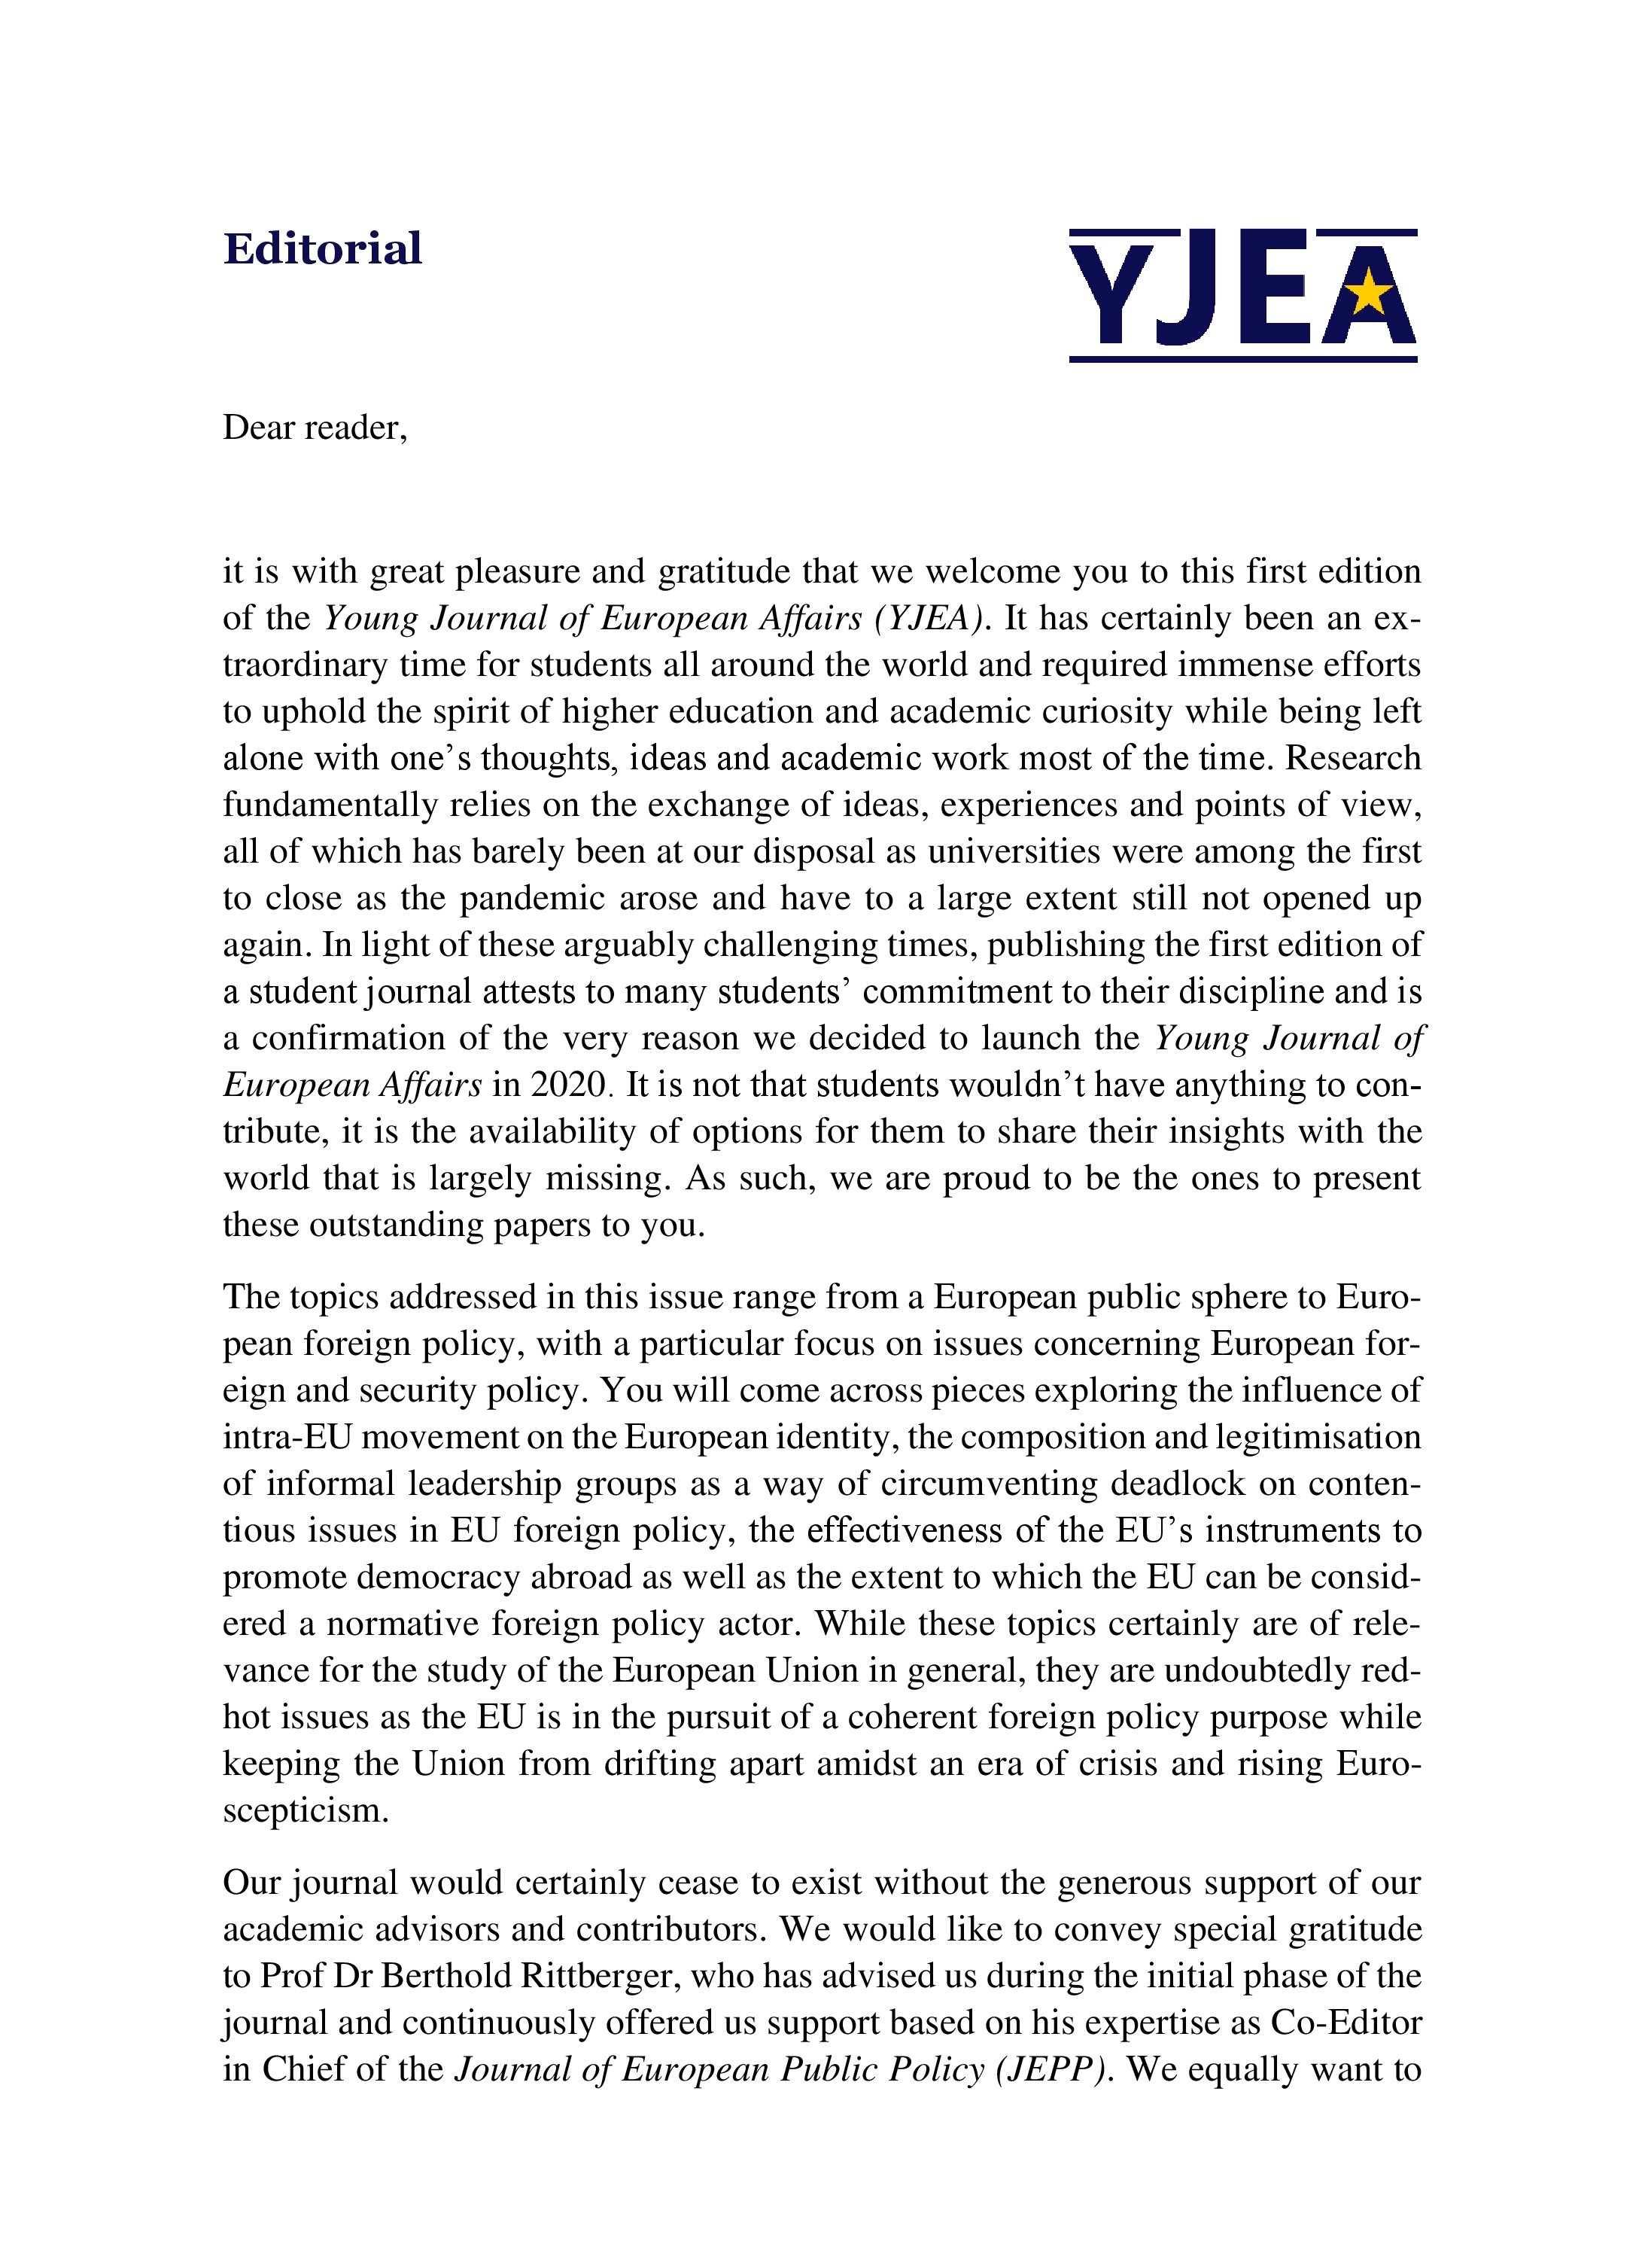 This is the editorial of the first issue of the YJEA in 2021.